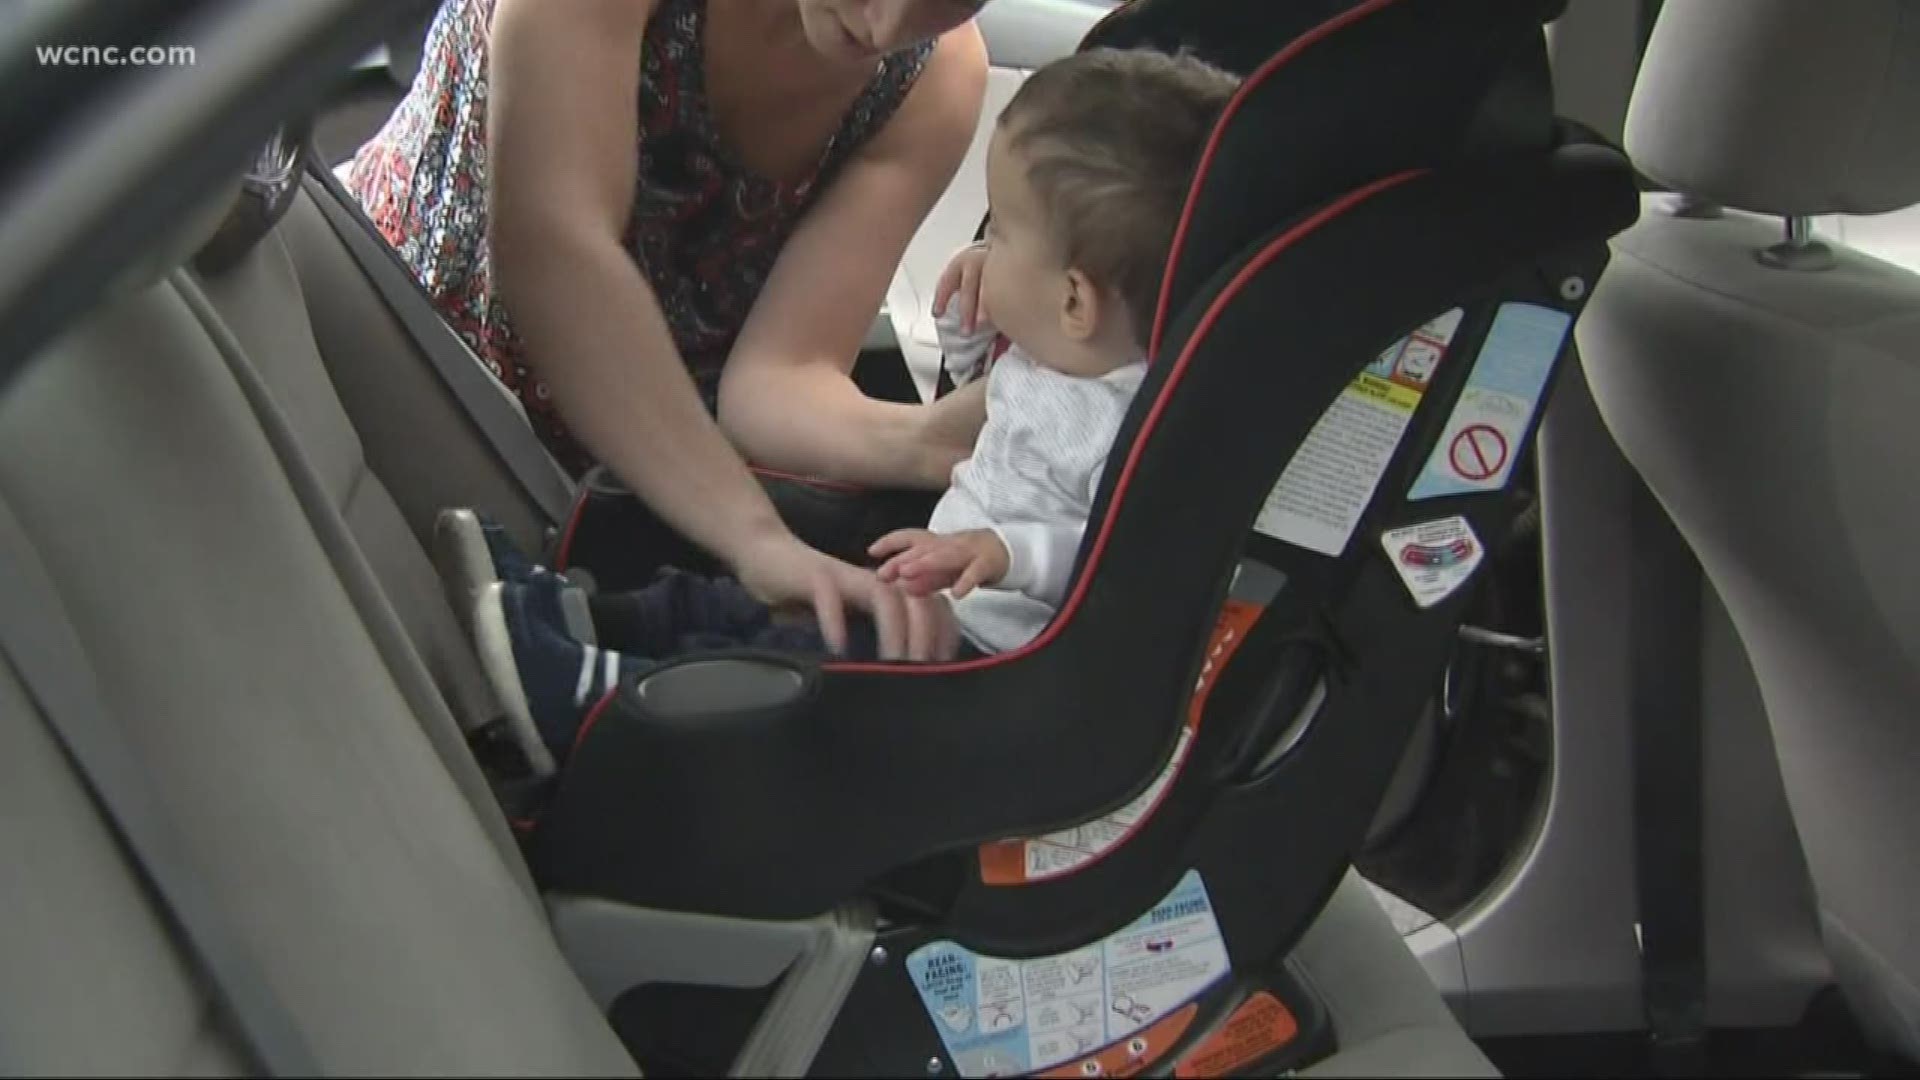 Parents of young children will be able to trade out their old car seats for new ones at over 4,000 Walmart locations in October. When you trade it in, you'll receive a $30 gift card to purchase baby items.